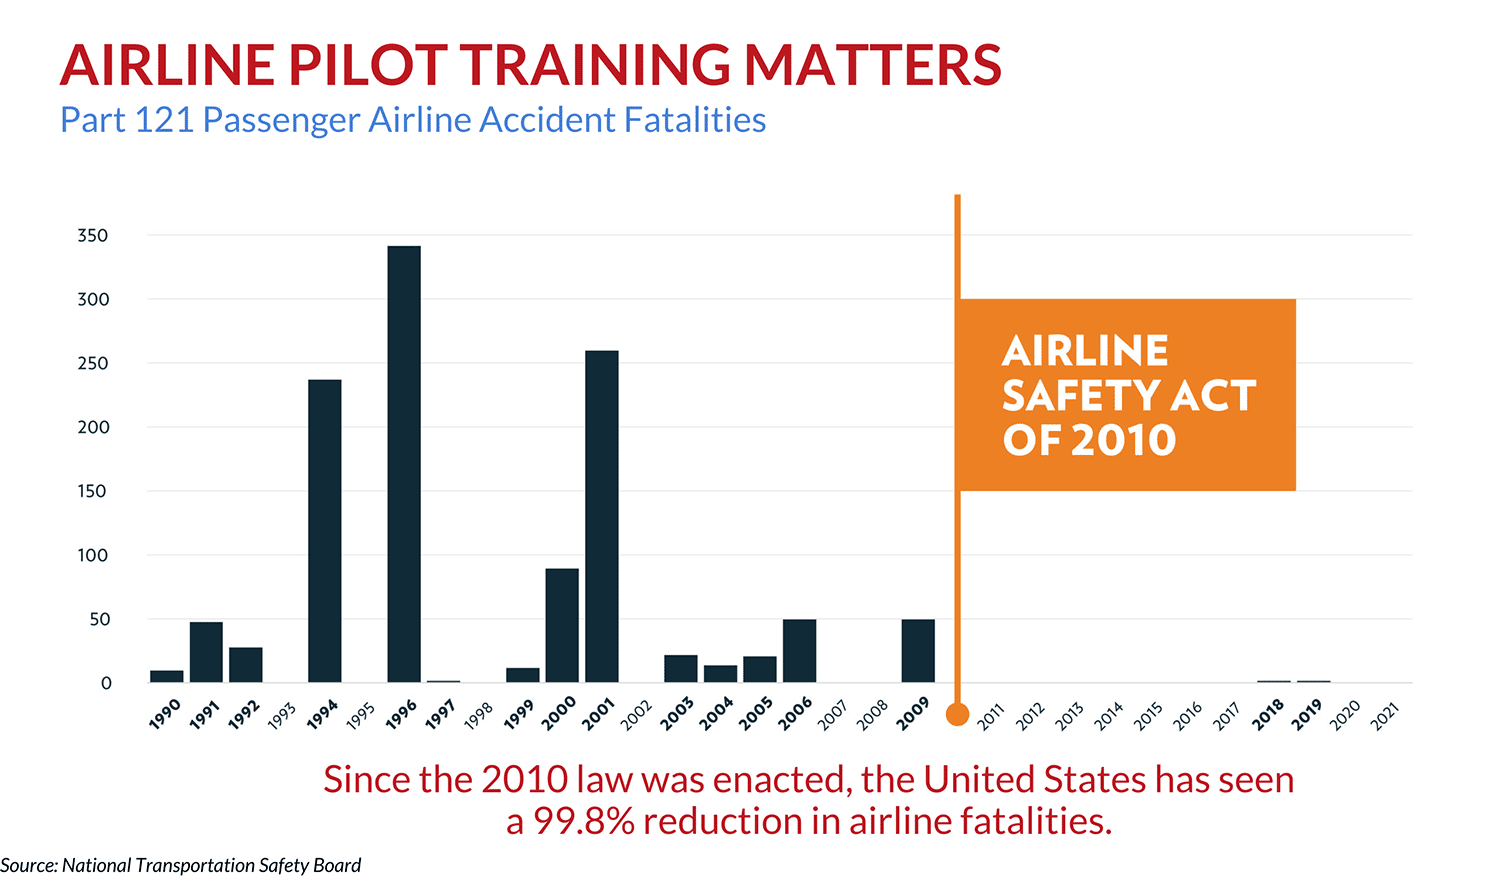 A pilot shortage is aggravating airline delays. Congress has two